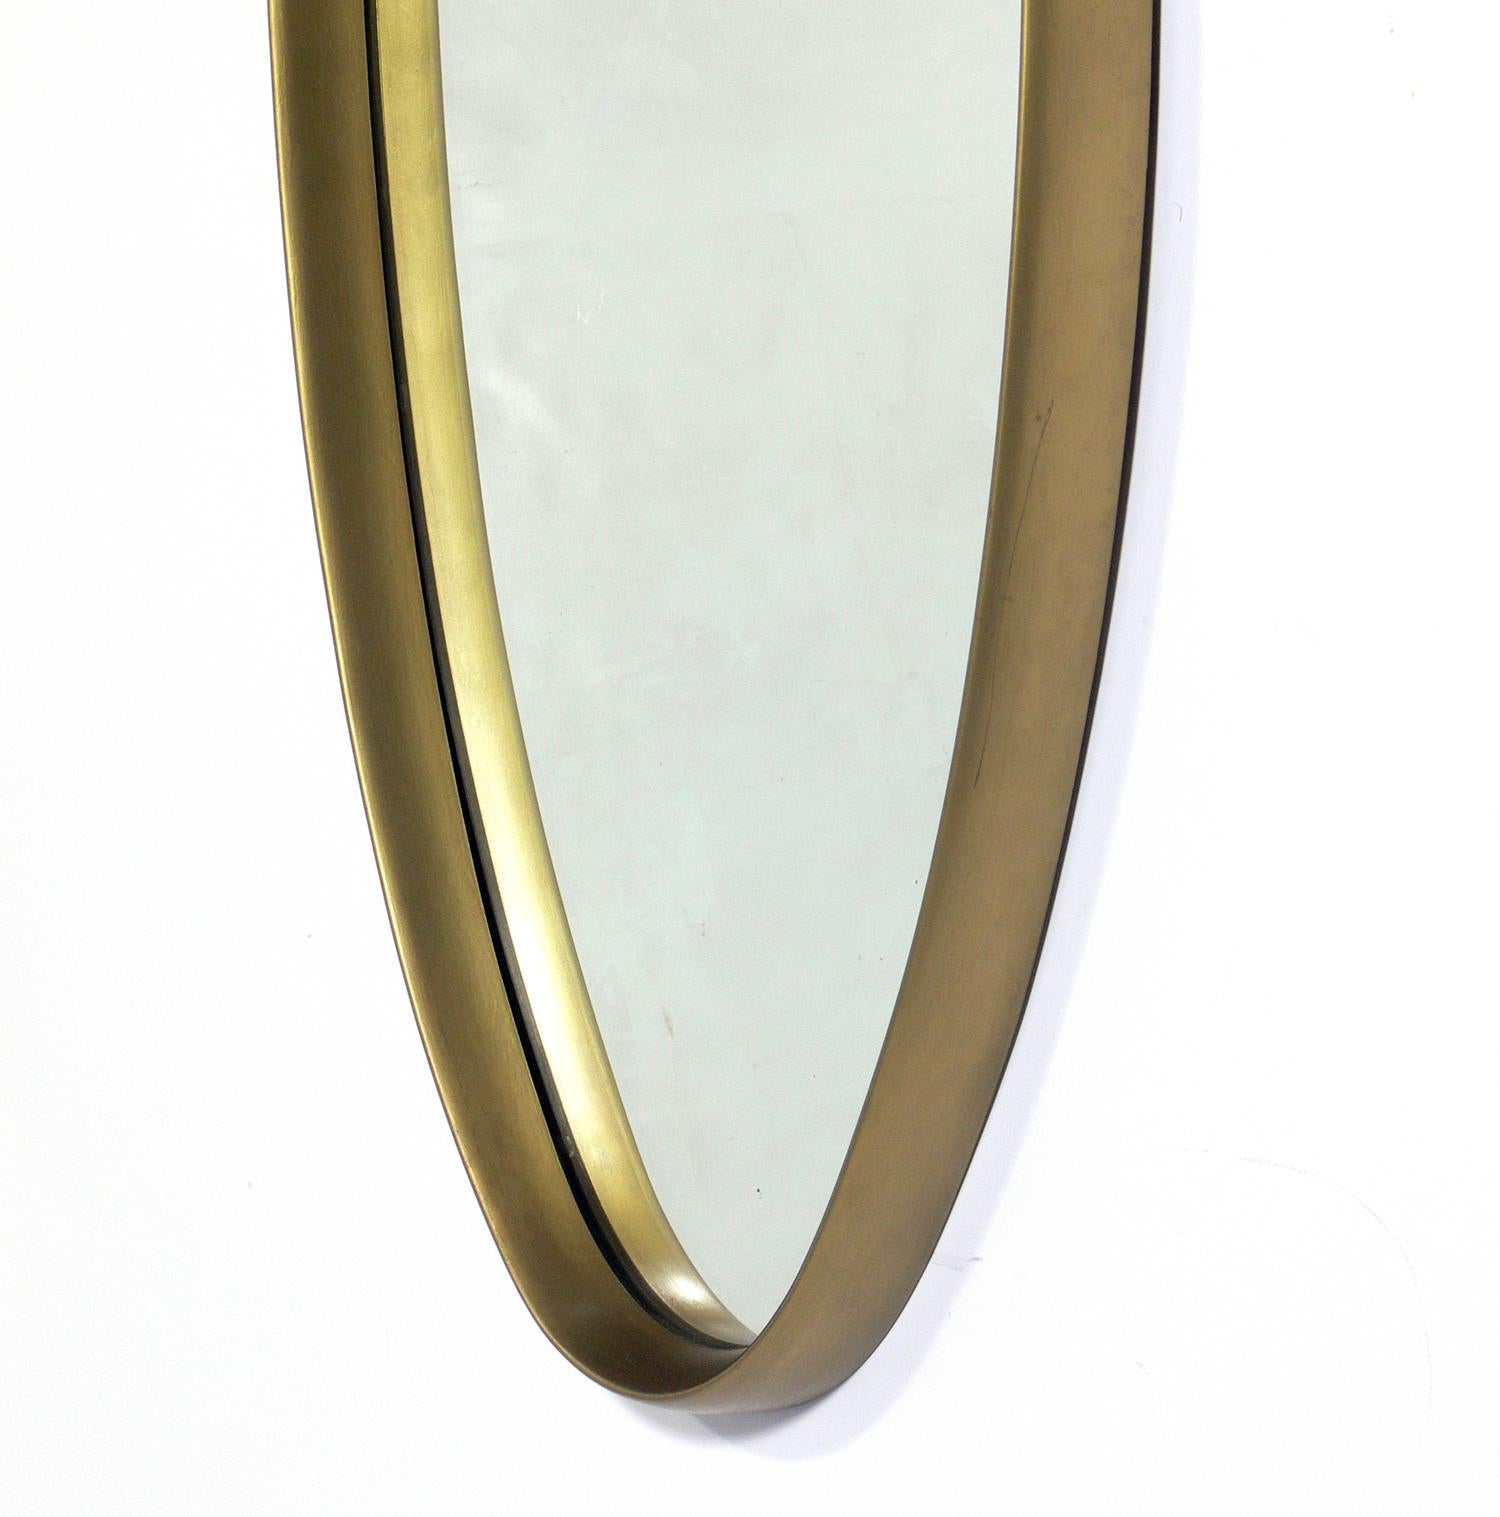 American Midcentury Gold Oval Mirror